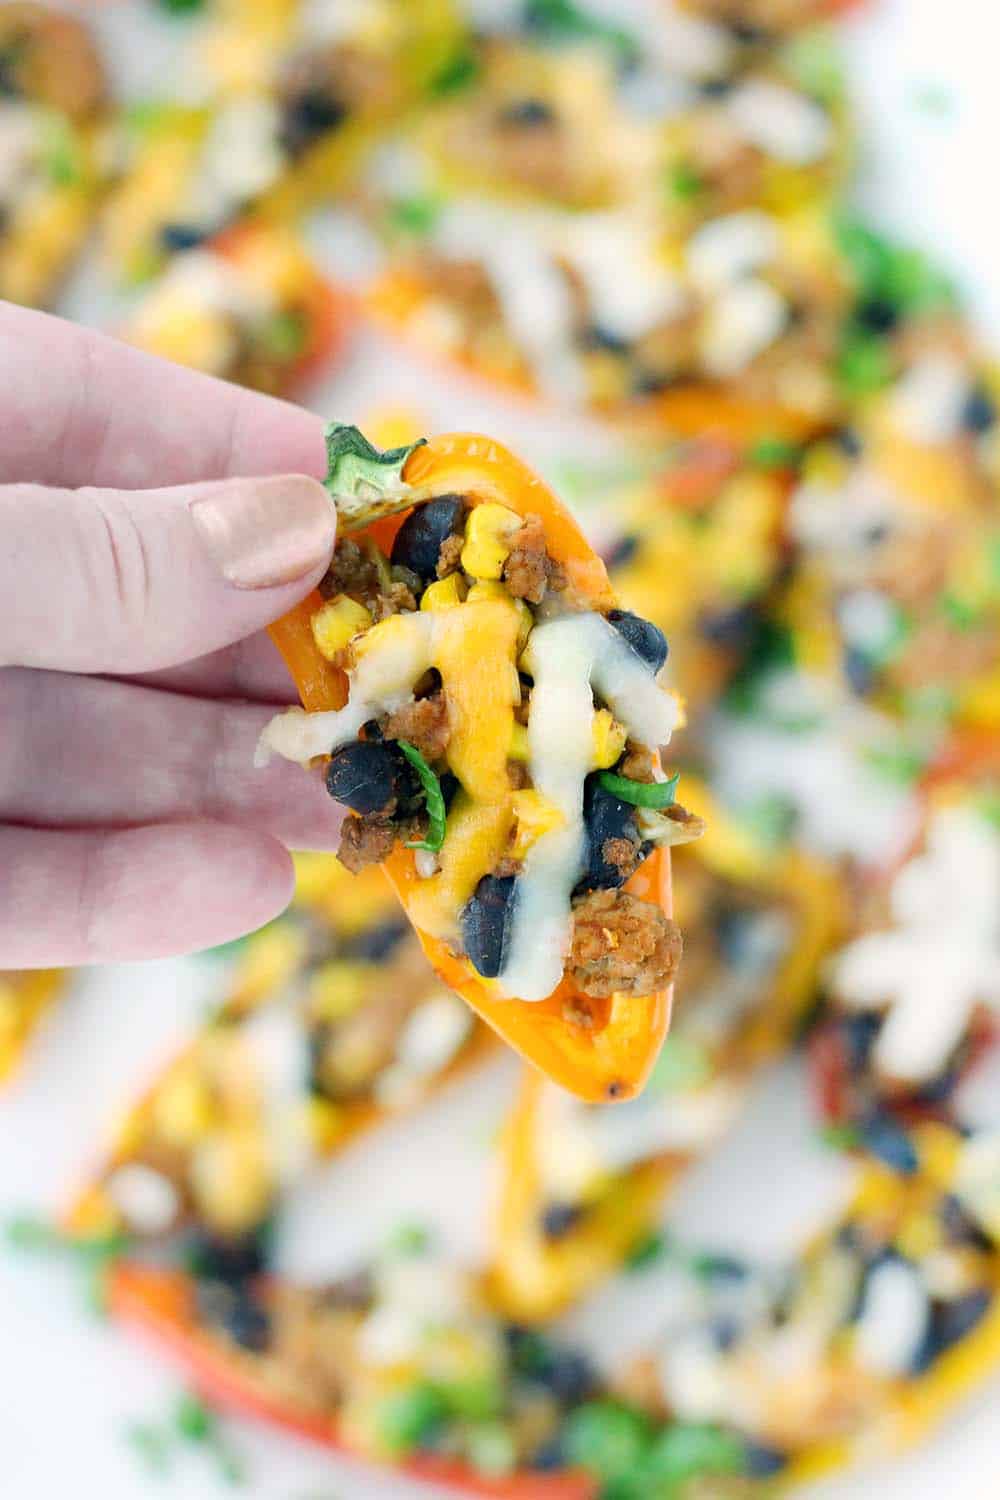 These Taco Stuffed Mini Peppers are the perfect appetizer or light meal! The sweet mini peppers are filled with slightly spicy, taco flavored ground turkey, black beans, and corn for a super fun, low-carb finger food.